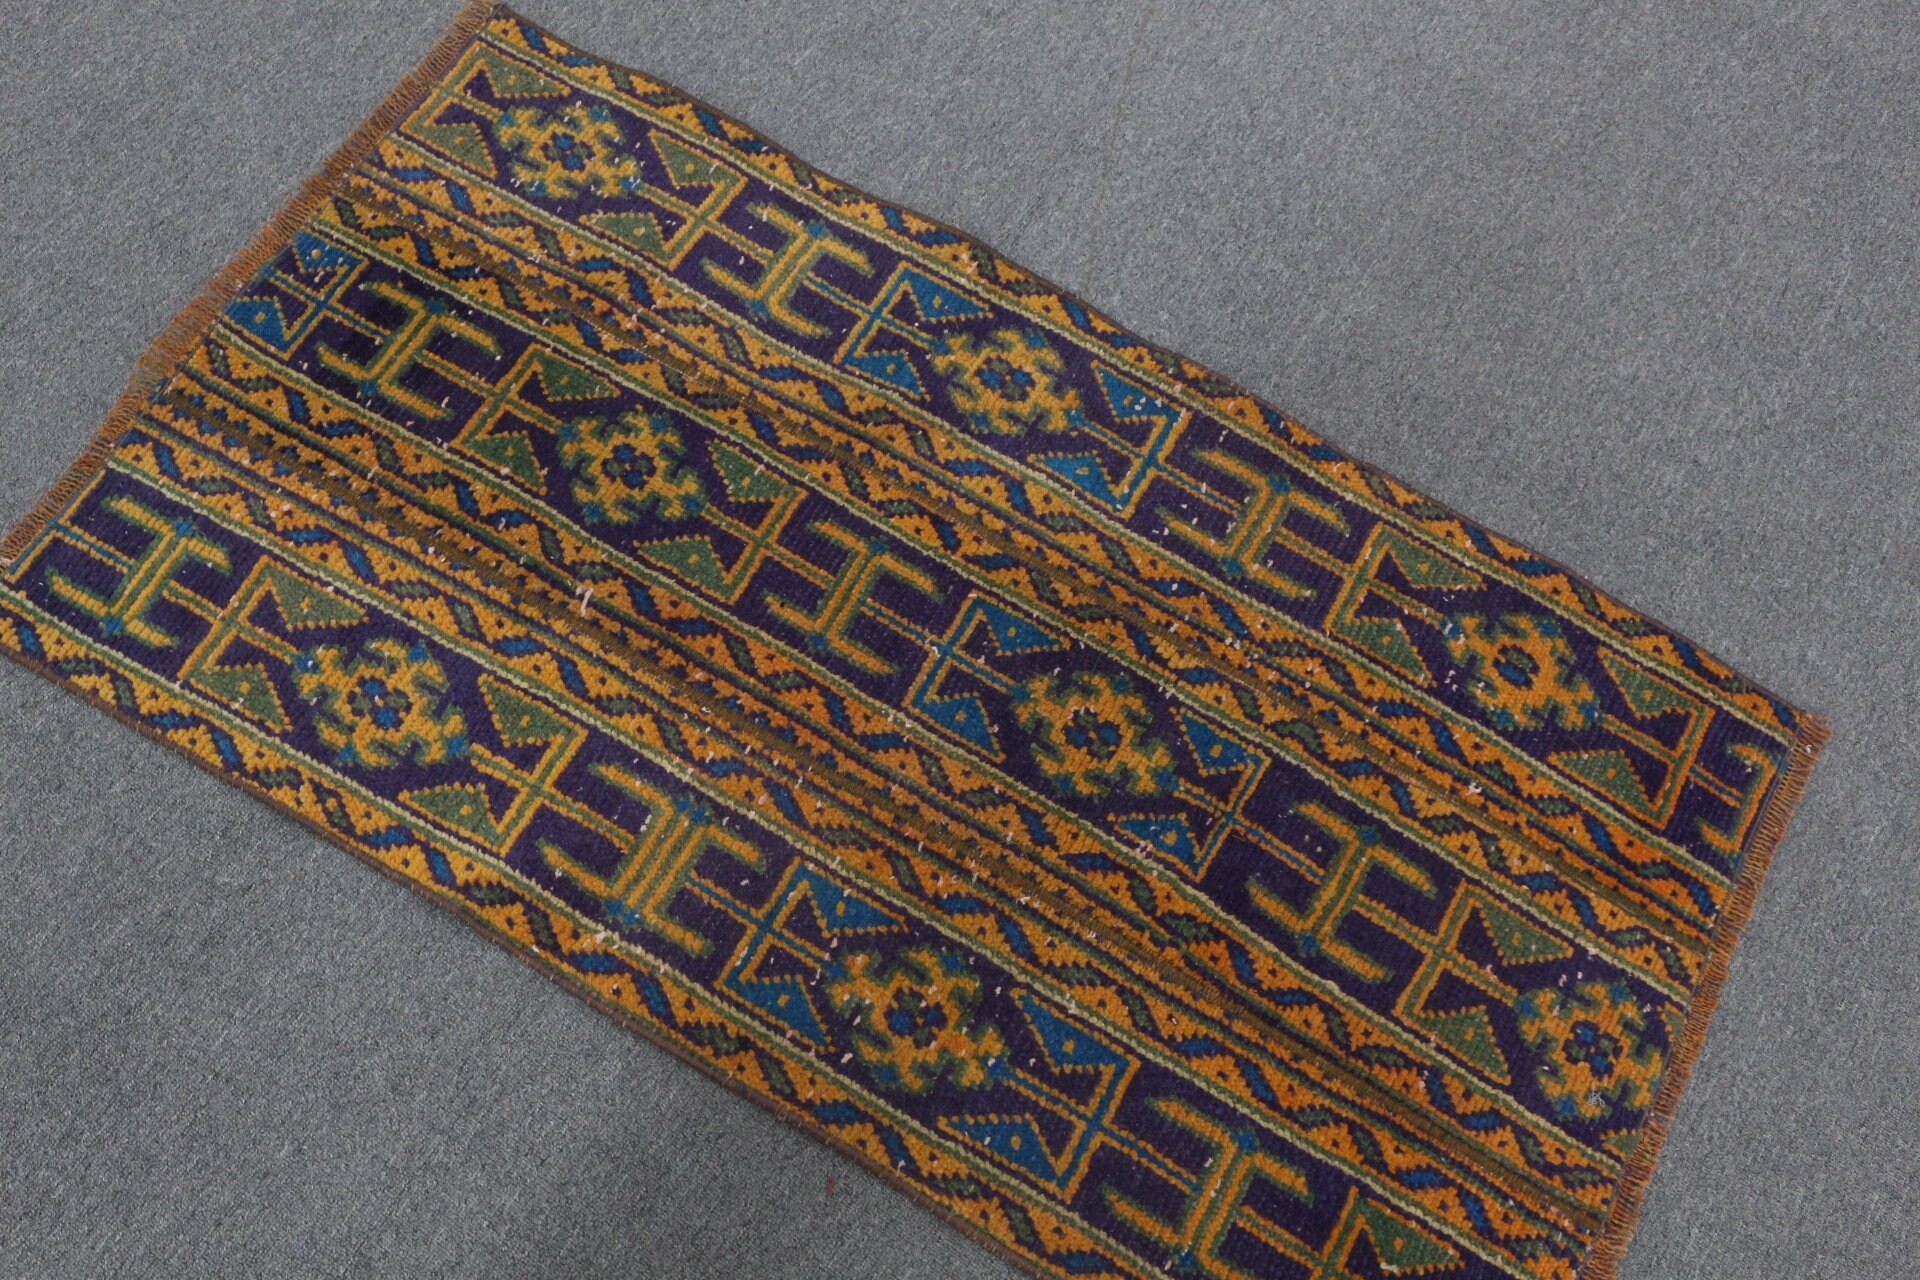 2.2x4 ft Small Rugs, Antique Rugs, Vintage Rug, Door Mat Rugs, Entry Rug, Wool Rug, Rugs for Car Mat, Turkish Rugs, Blue Oushak Rugs